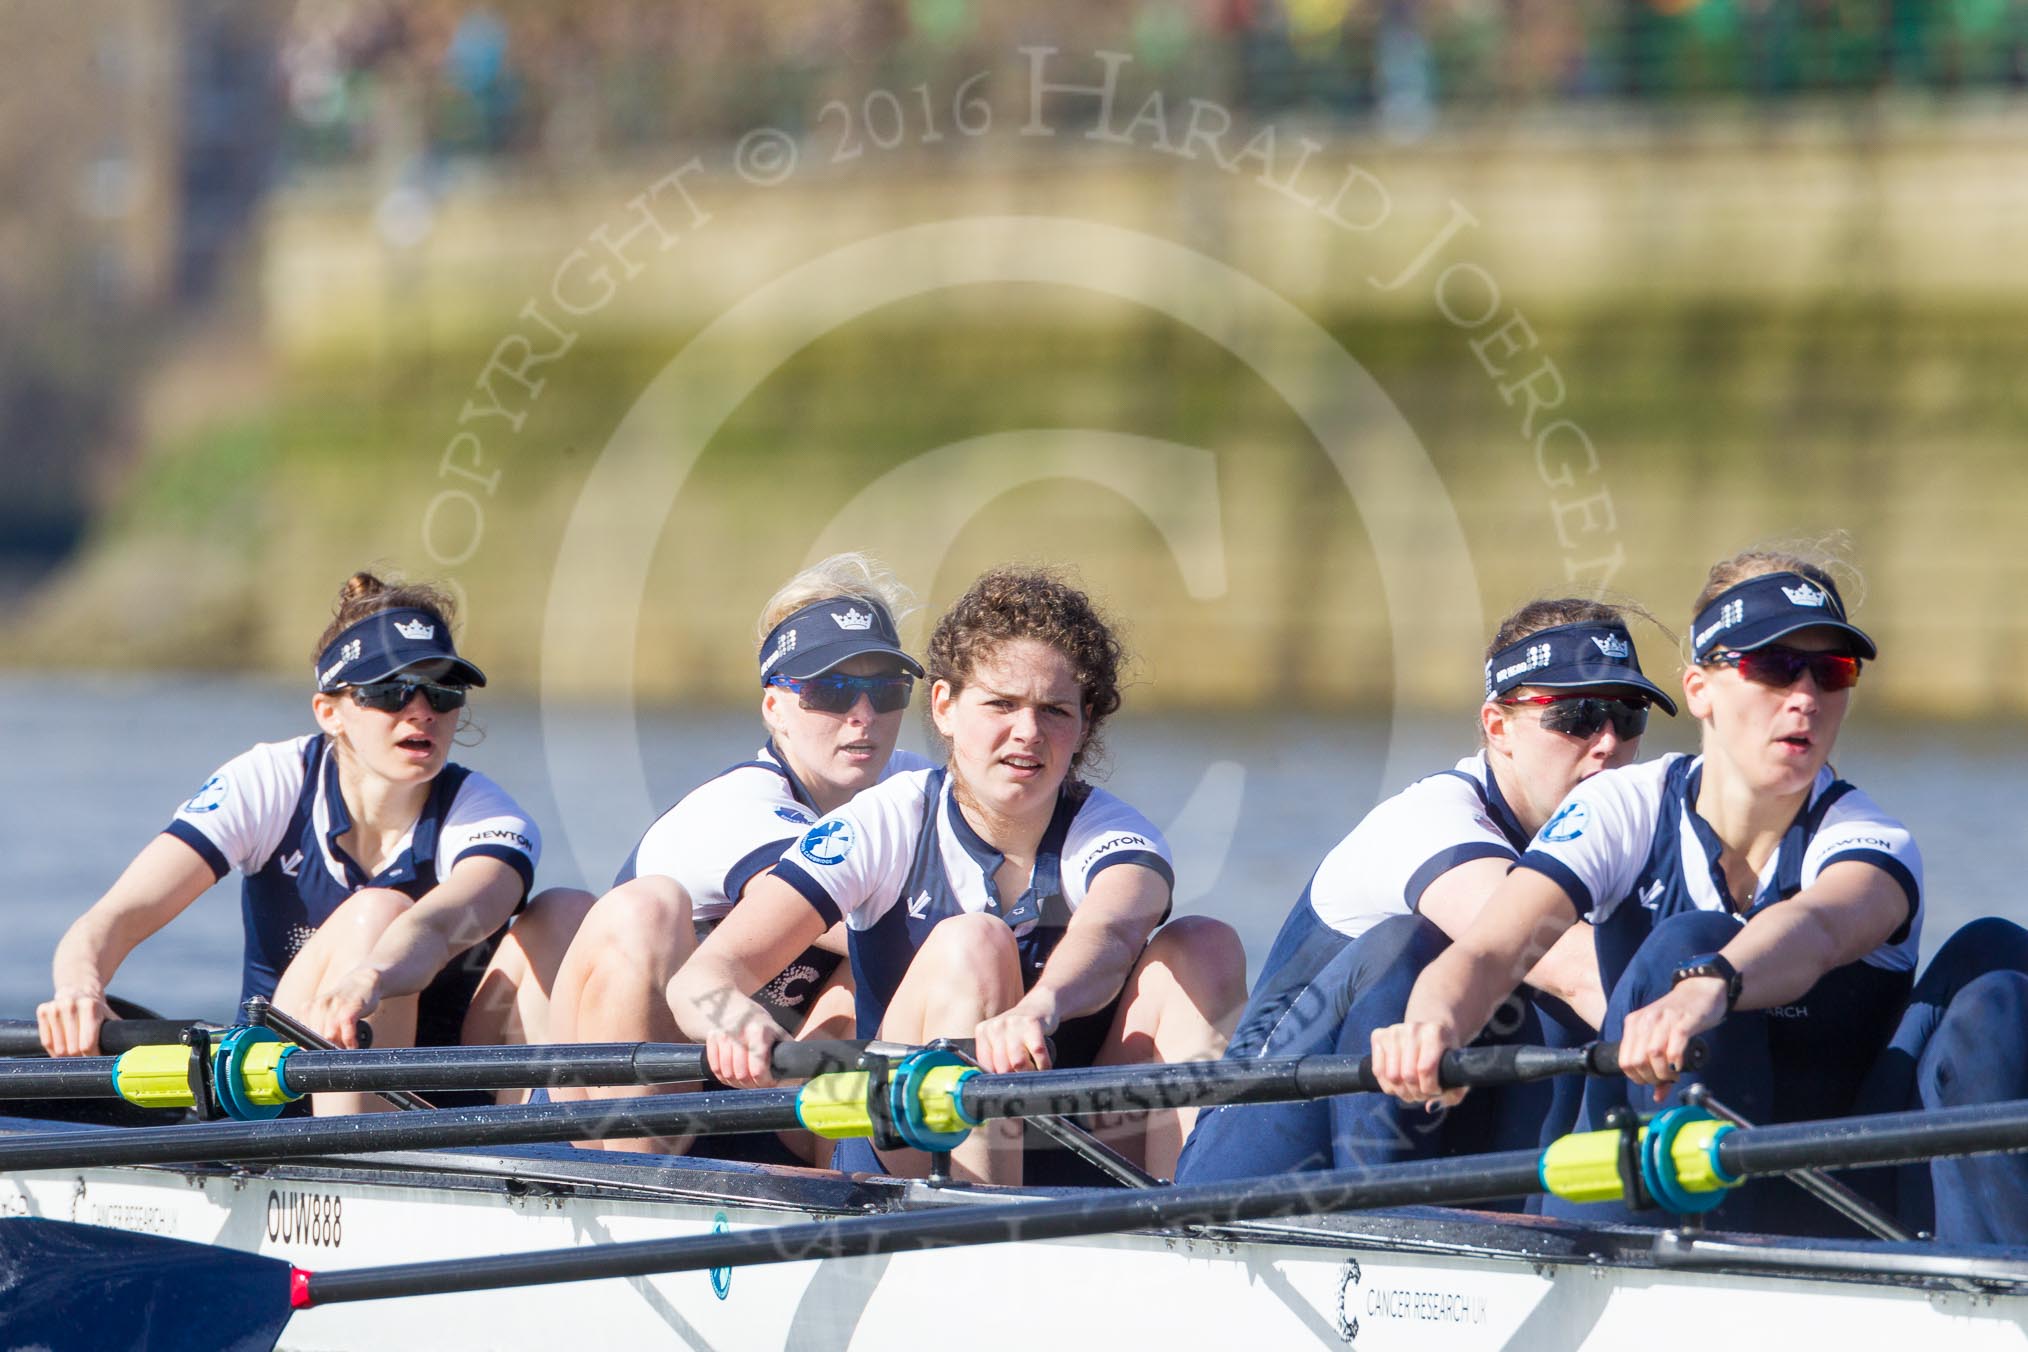 The Boat Race season 2016 -  The Cancer Research Women's Boat Race.
River Thames between Putney Bridge and Mortlake,
London SW15,

United Kingdom,
on 27 March 2016 at 14:11, image #192